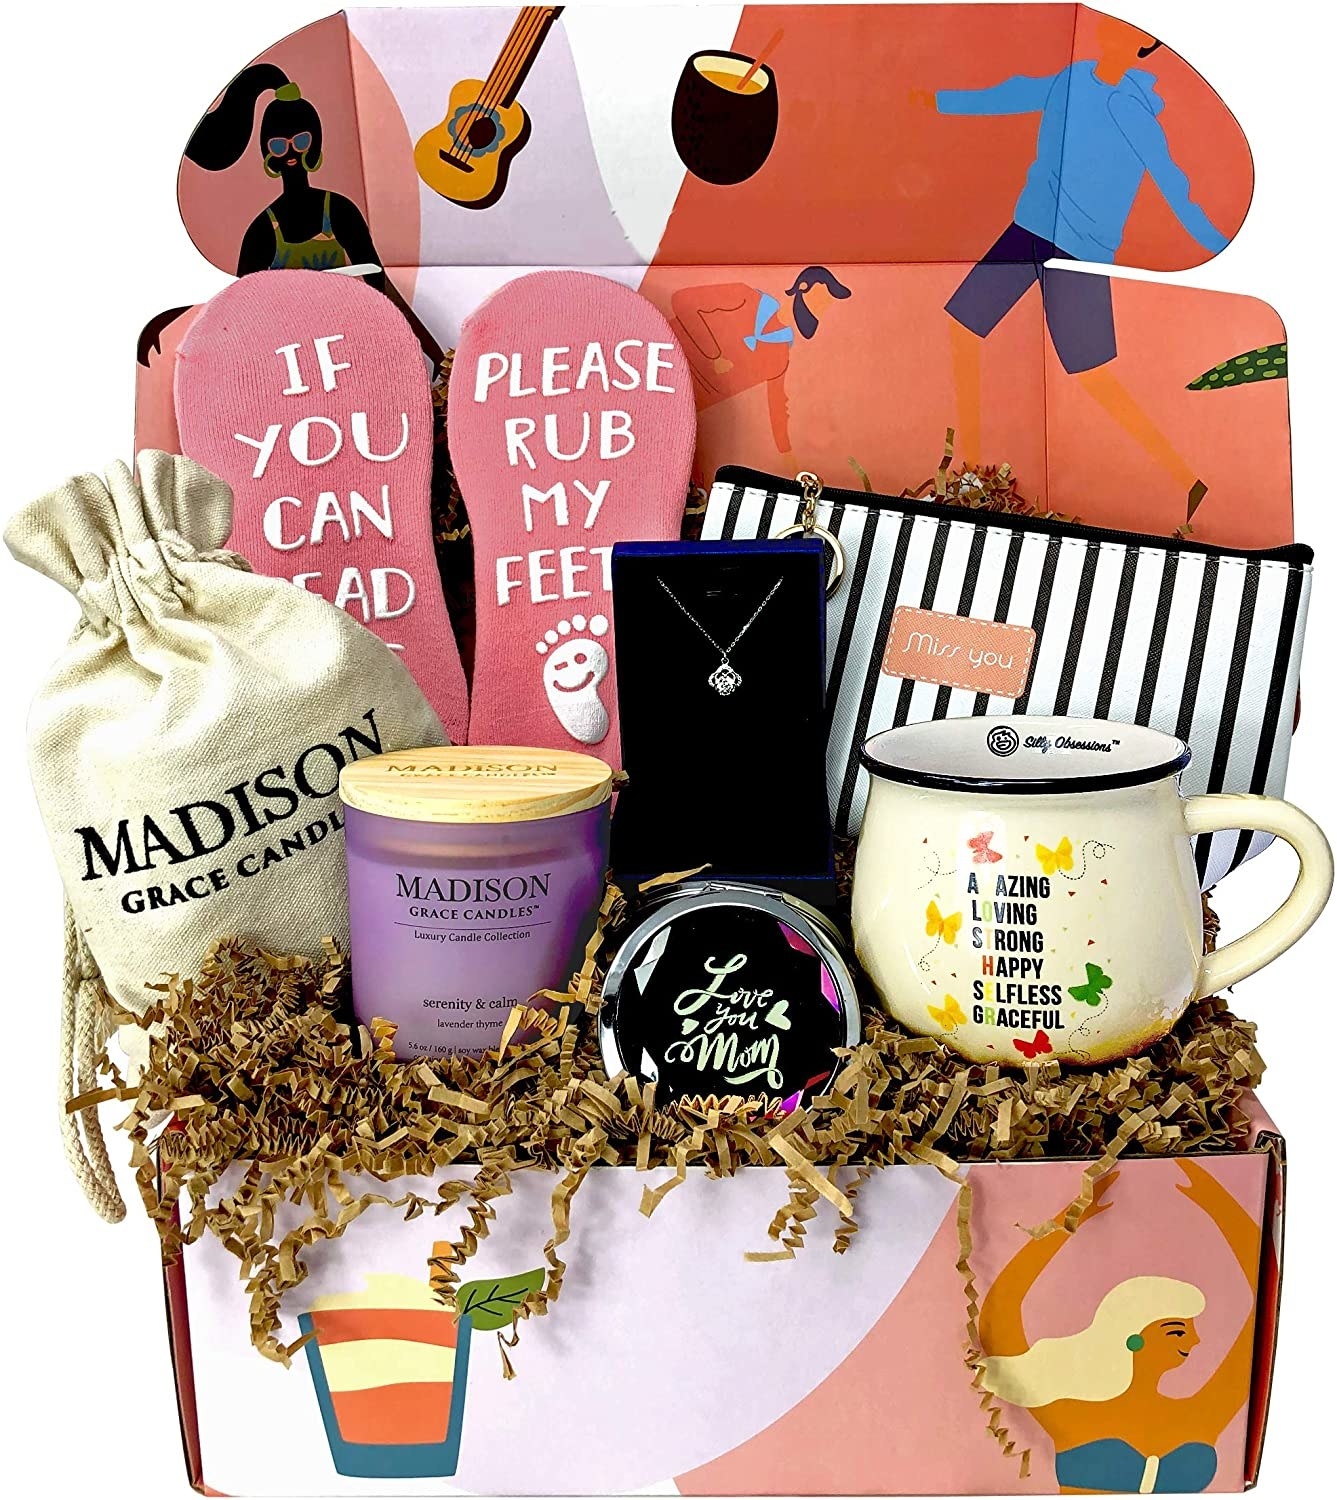 Full gift set showing socks, candle, mirror, mug, necklace, and cosmetic bag inside box